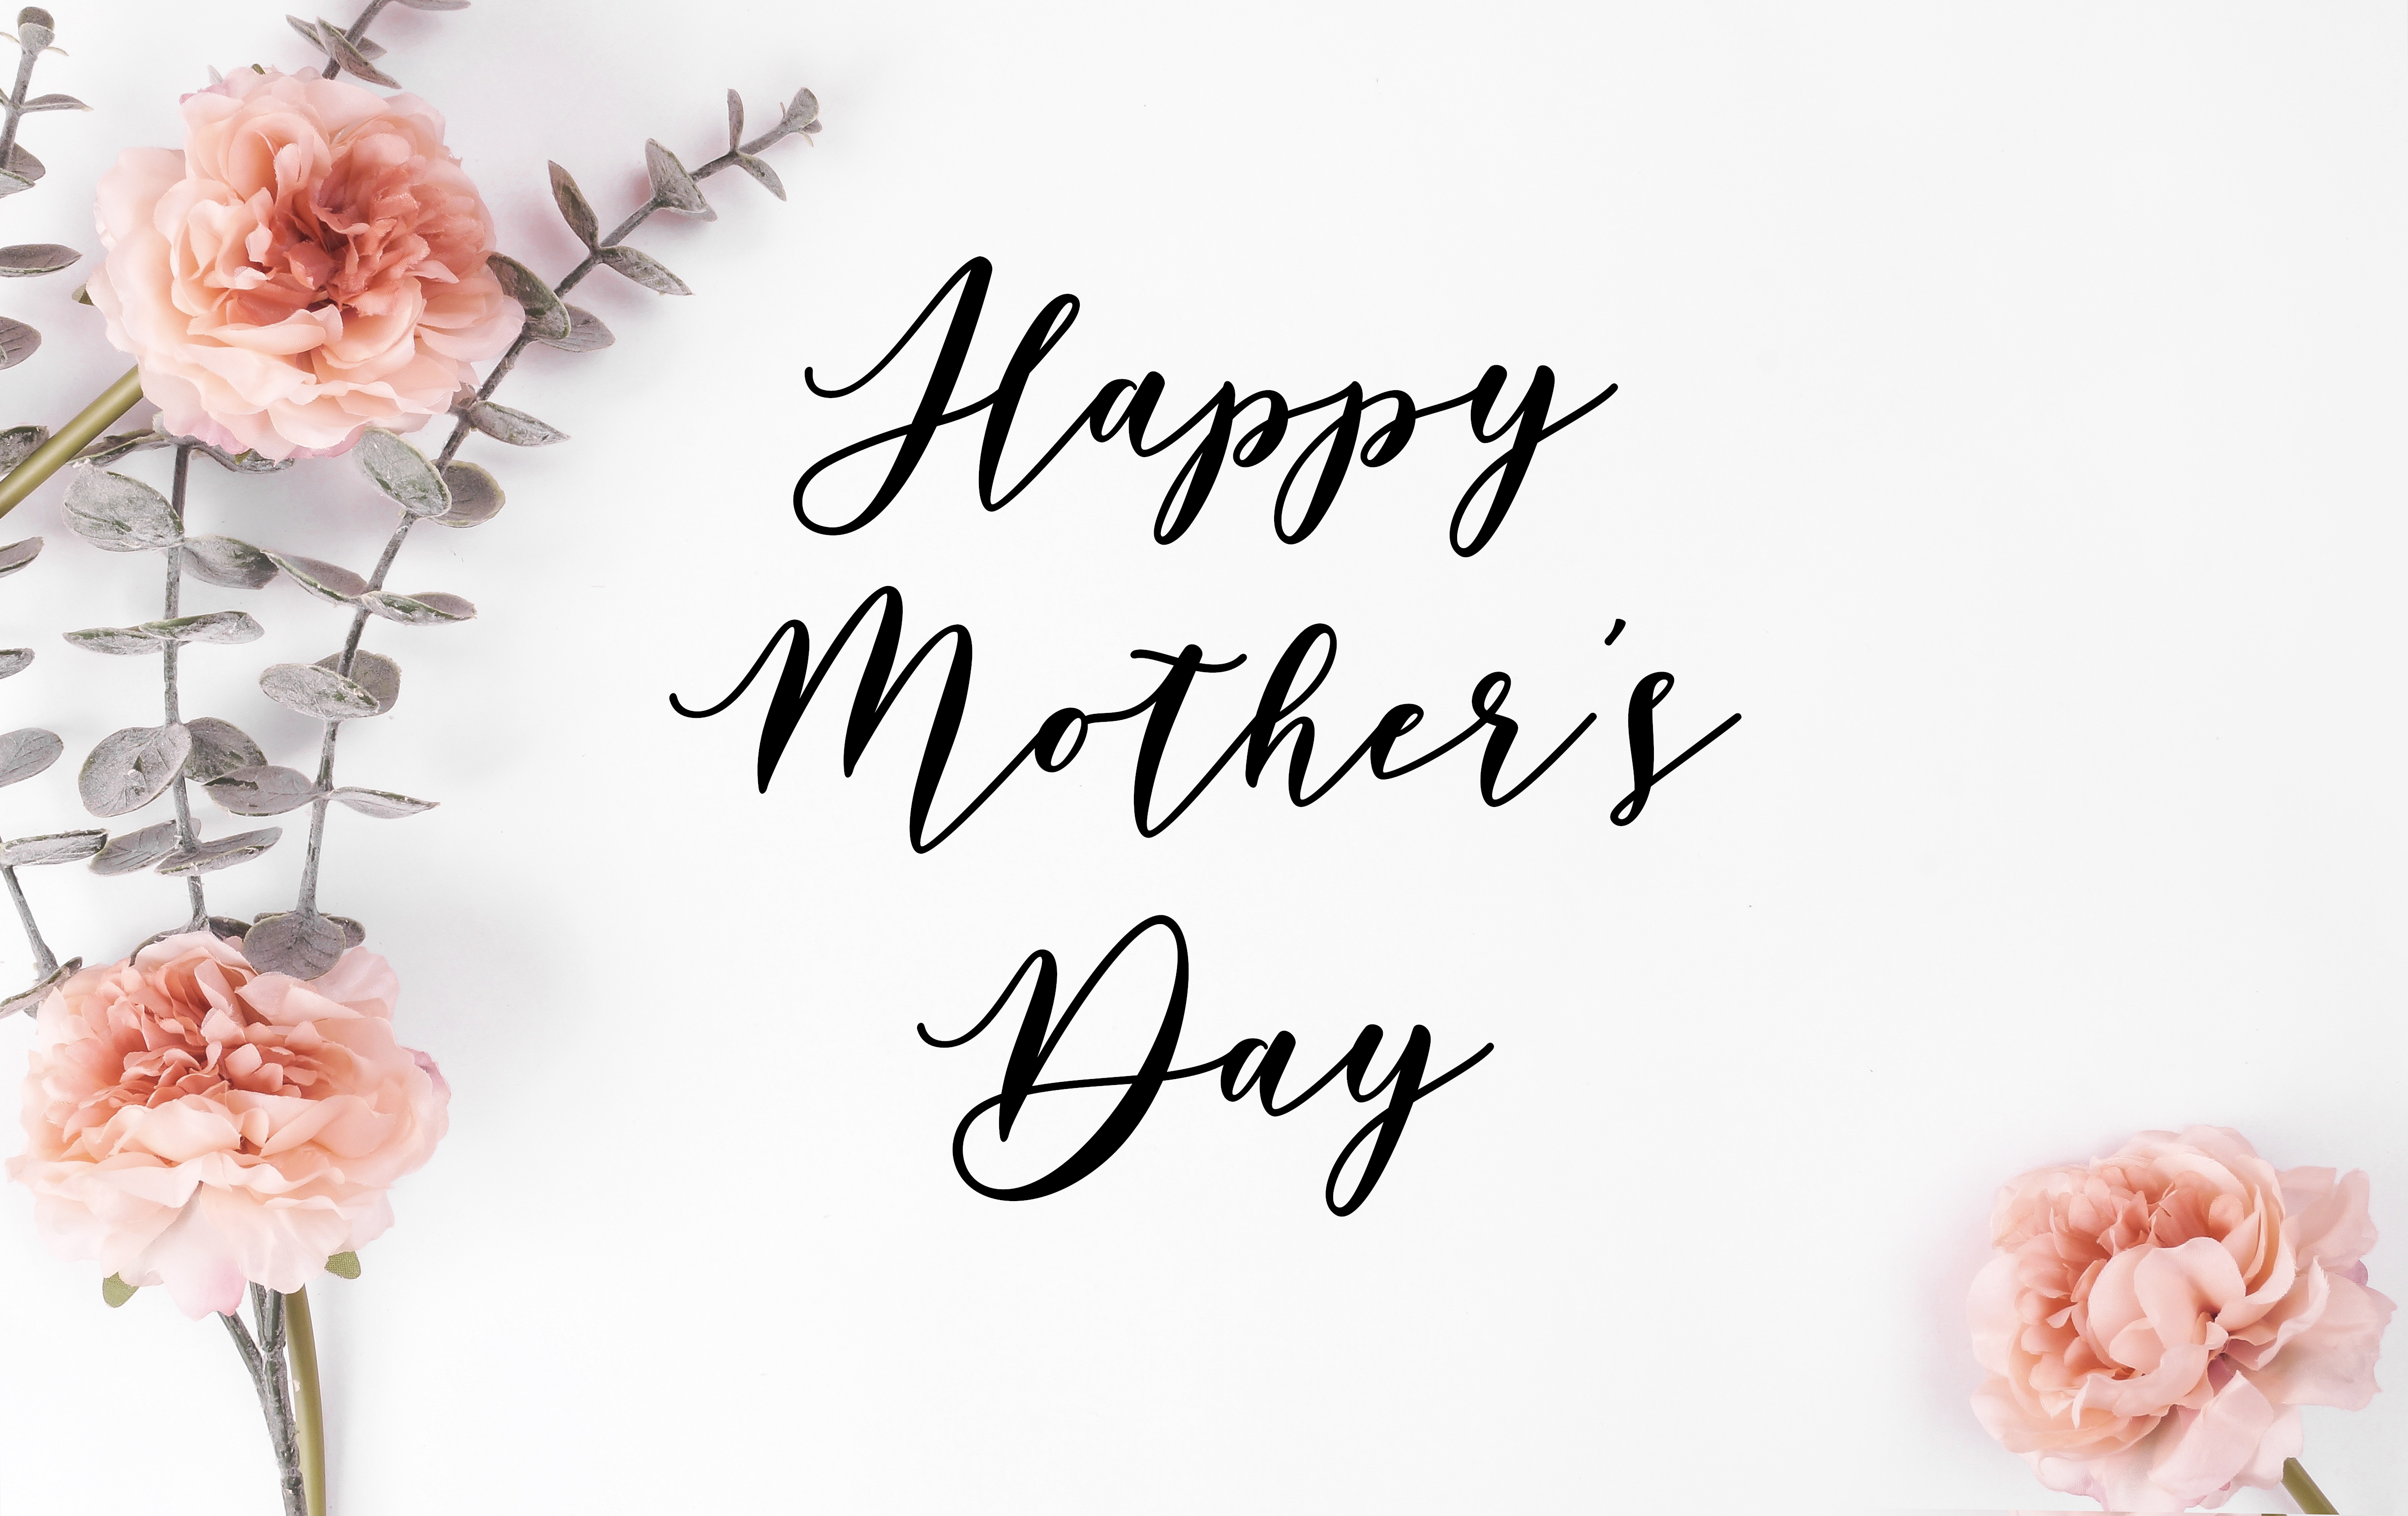 Happy Mother's Day Decal - Holiday Mother's Day Vinyl Decals for Home, Gifts, Businesses and More!